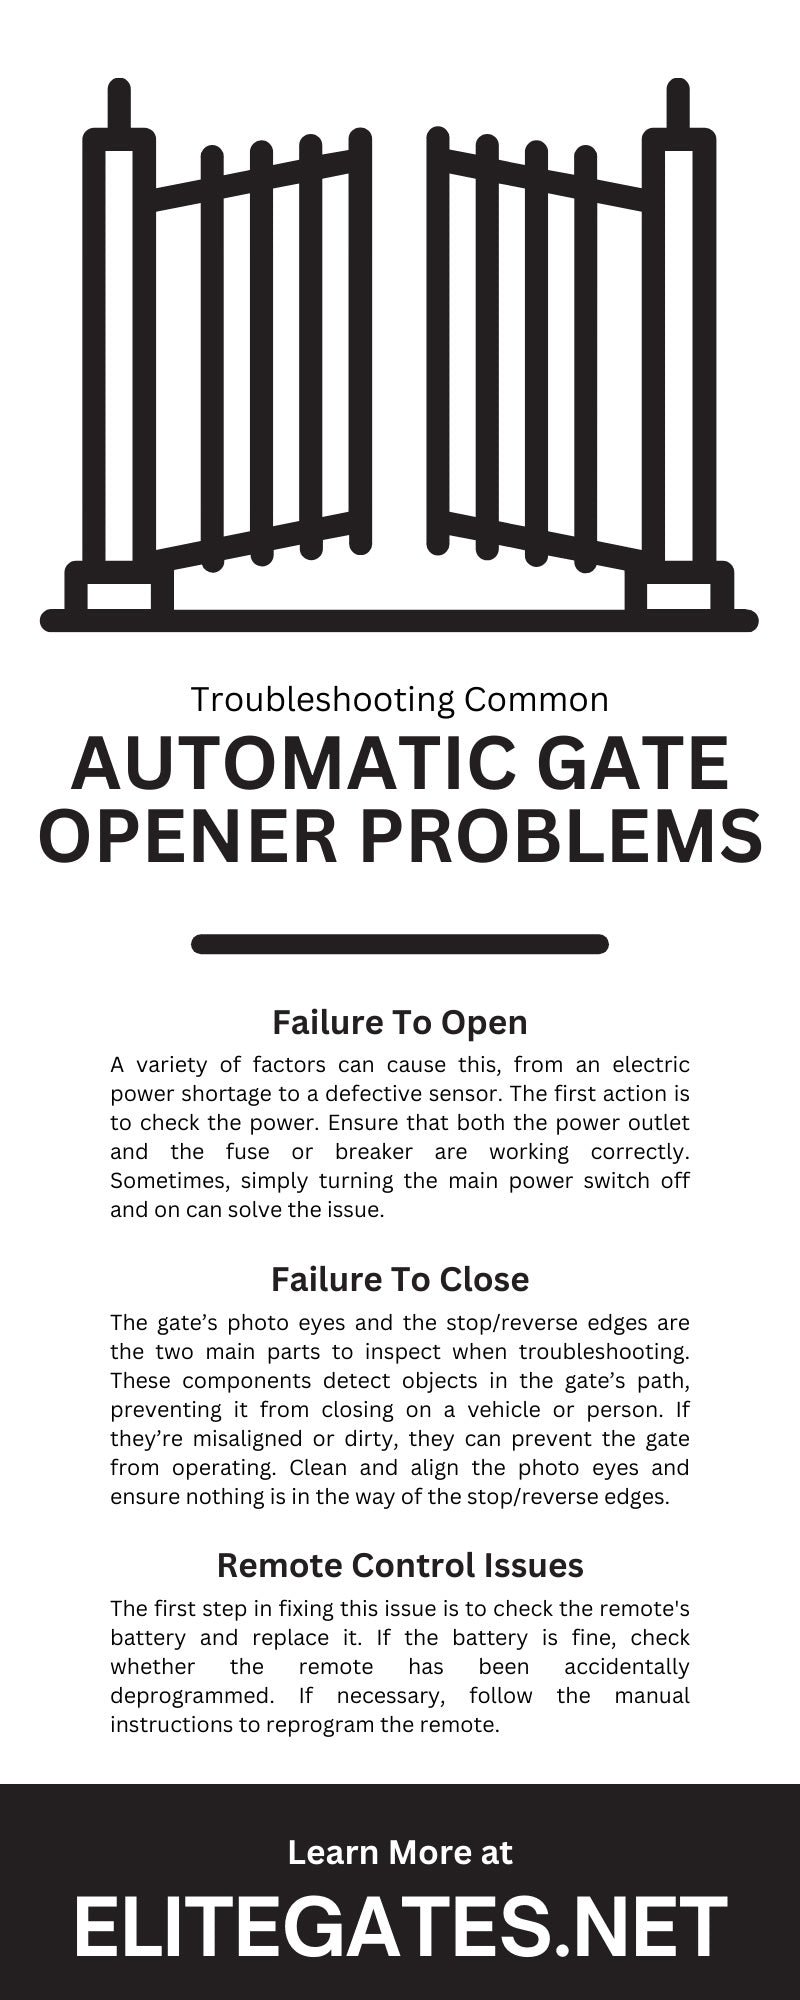 Troubleshooting Common Automatic Gate Opener Problems